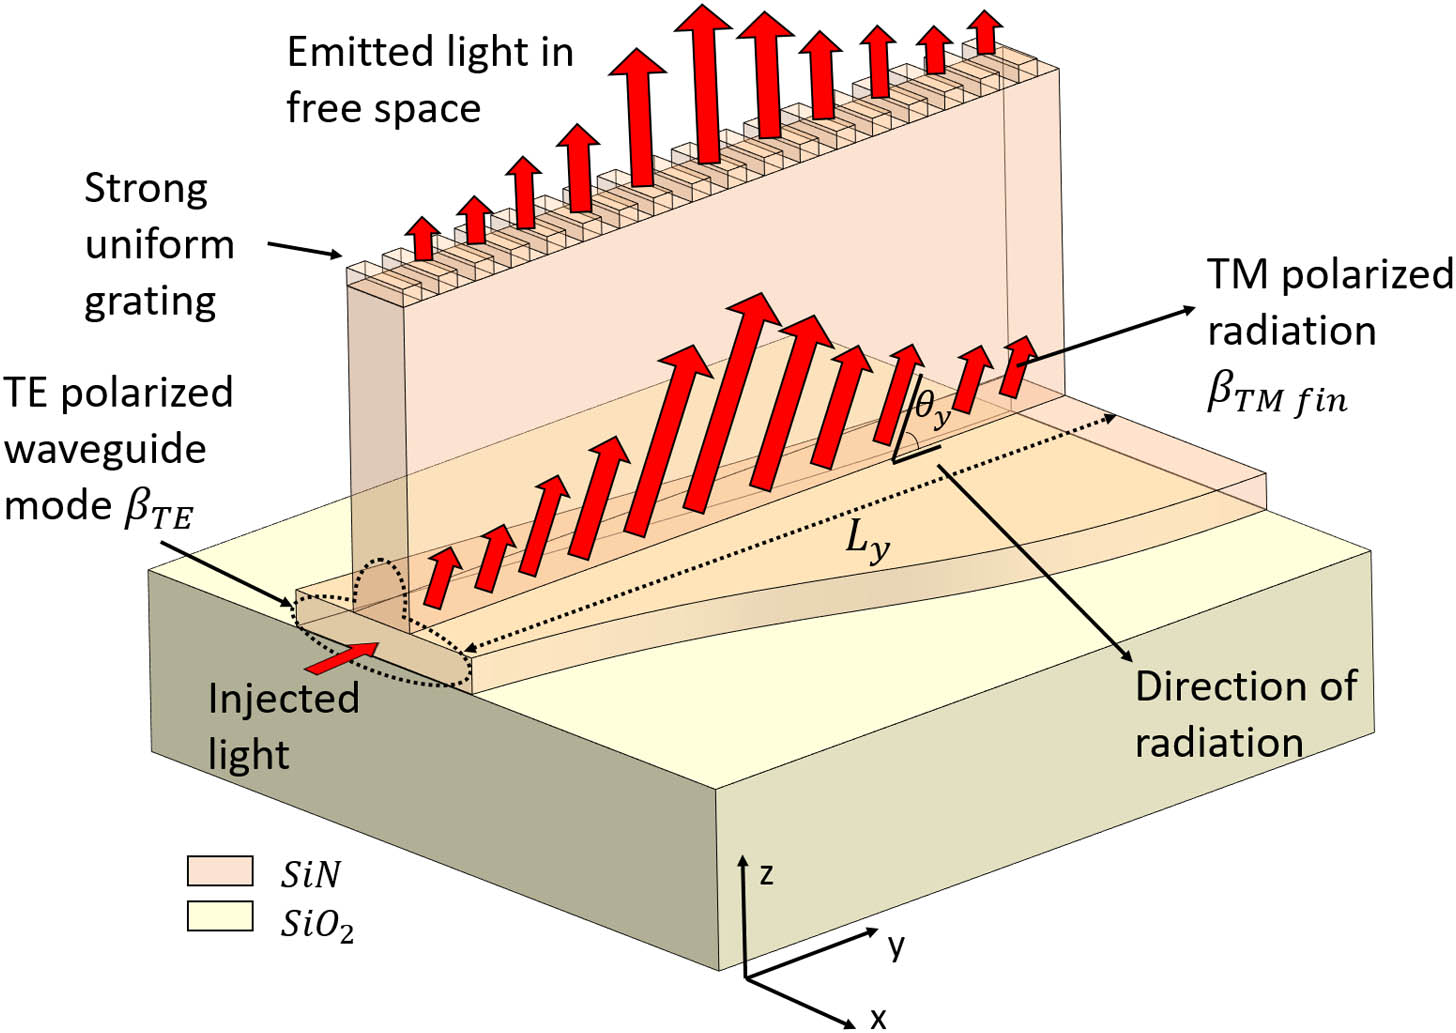 3D concept drawing of the proposed antenna structure. A vertical fin on top of a rectangular waveguide can couple the light upward depending on the position of this fin. The radiation strength is proportional to the asymmetry of the structure, defined by the offset of the fin from the center position of the waveguide core. The fin has a strong uniform grating on top to couple the light from the fin to free space, but this grating remains constant (no apodization) throughout the entire antenna design. The core layer tapers underneath the fin structure to maintain the propagation constant of the optical mode, required for emitting a Gaussian beam with a flat phase front. The simulations in this work are carried out with SiN as core and fin material, but the principle also works for Si platforms.